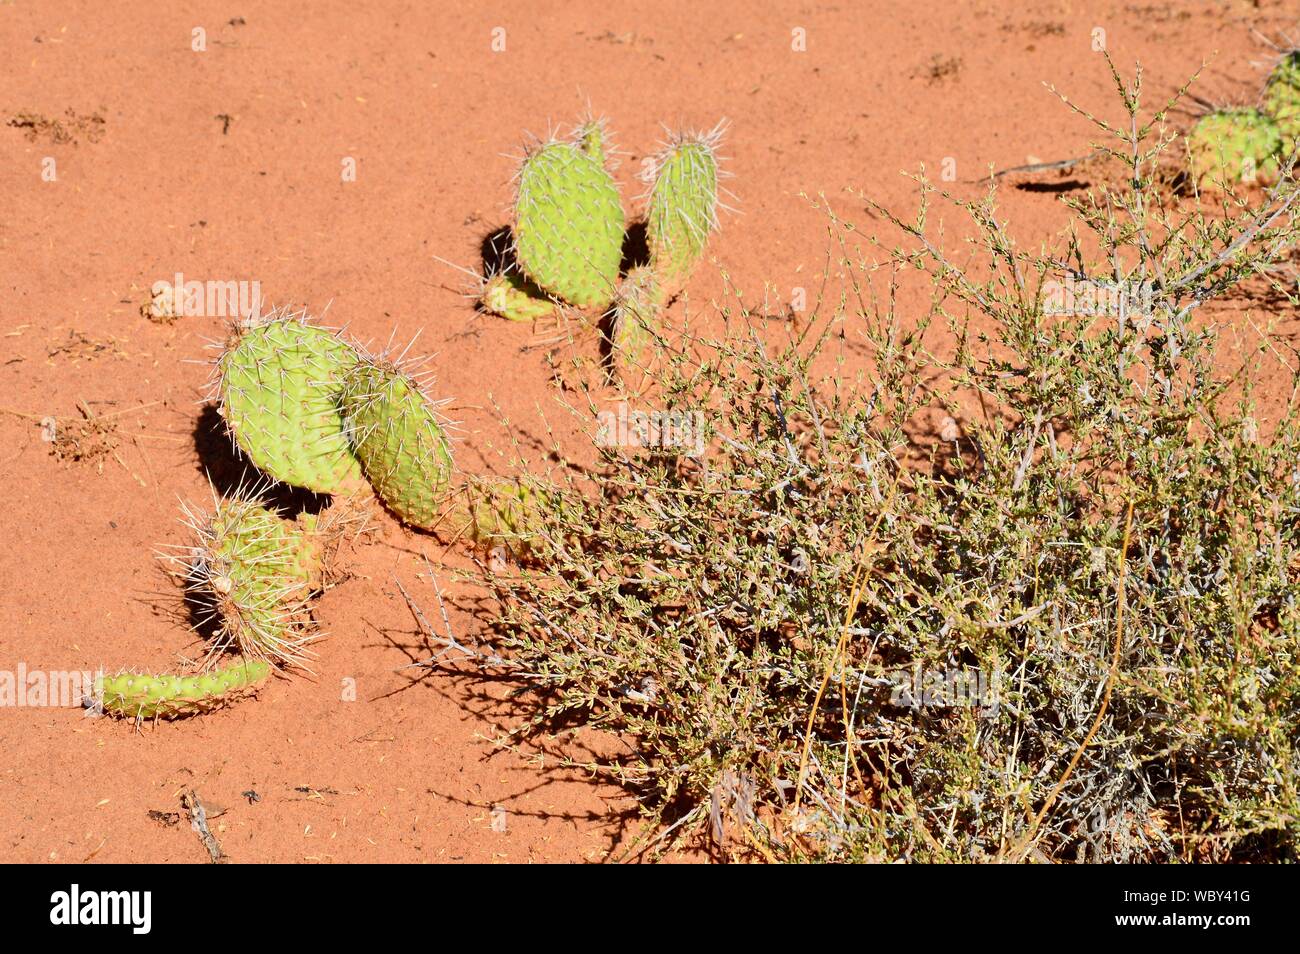 divers plants in the desert, Stock Photo